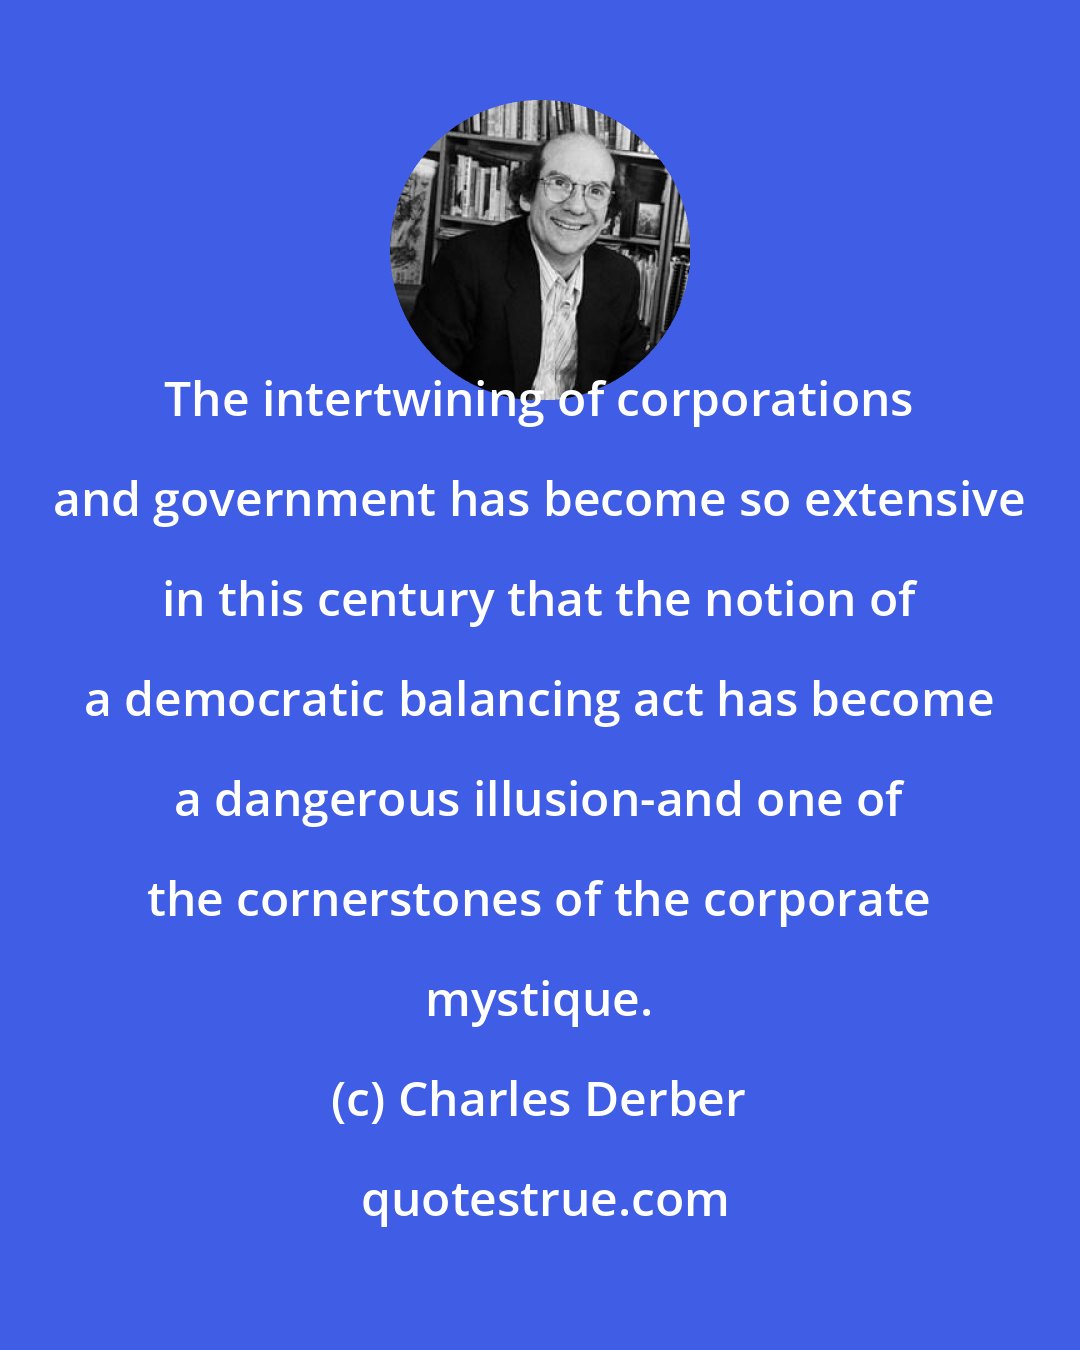 Charles Derber: The intertwining of corporations and government has become so extensive in this century that the notion of a democratic balancing act has become a dangerous illusion-and one of the cornerstones of the corporate mystique.